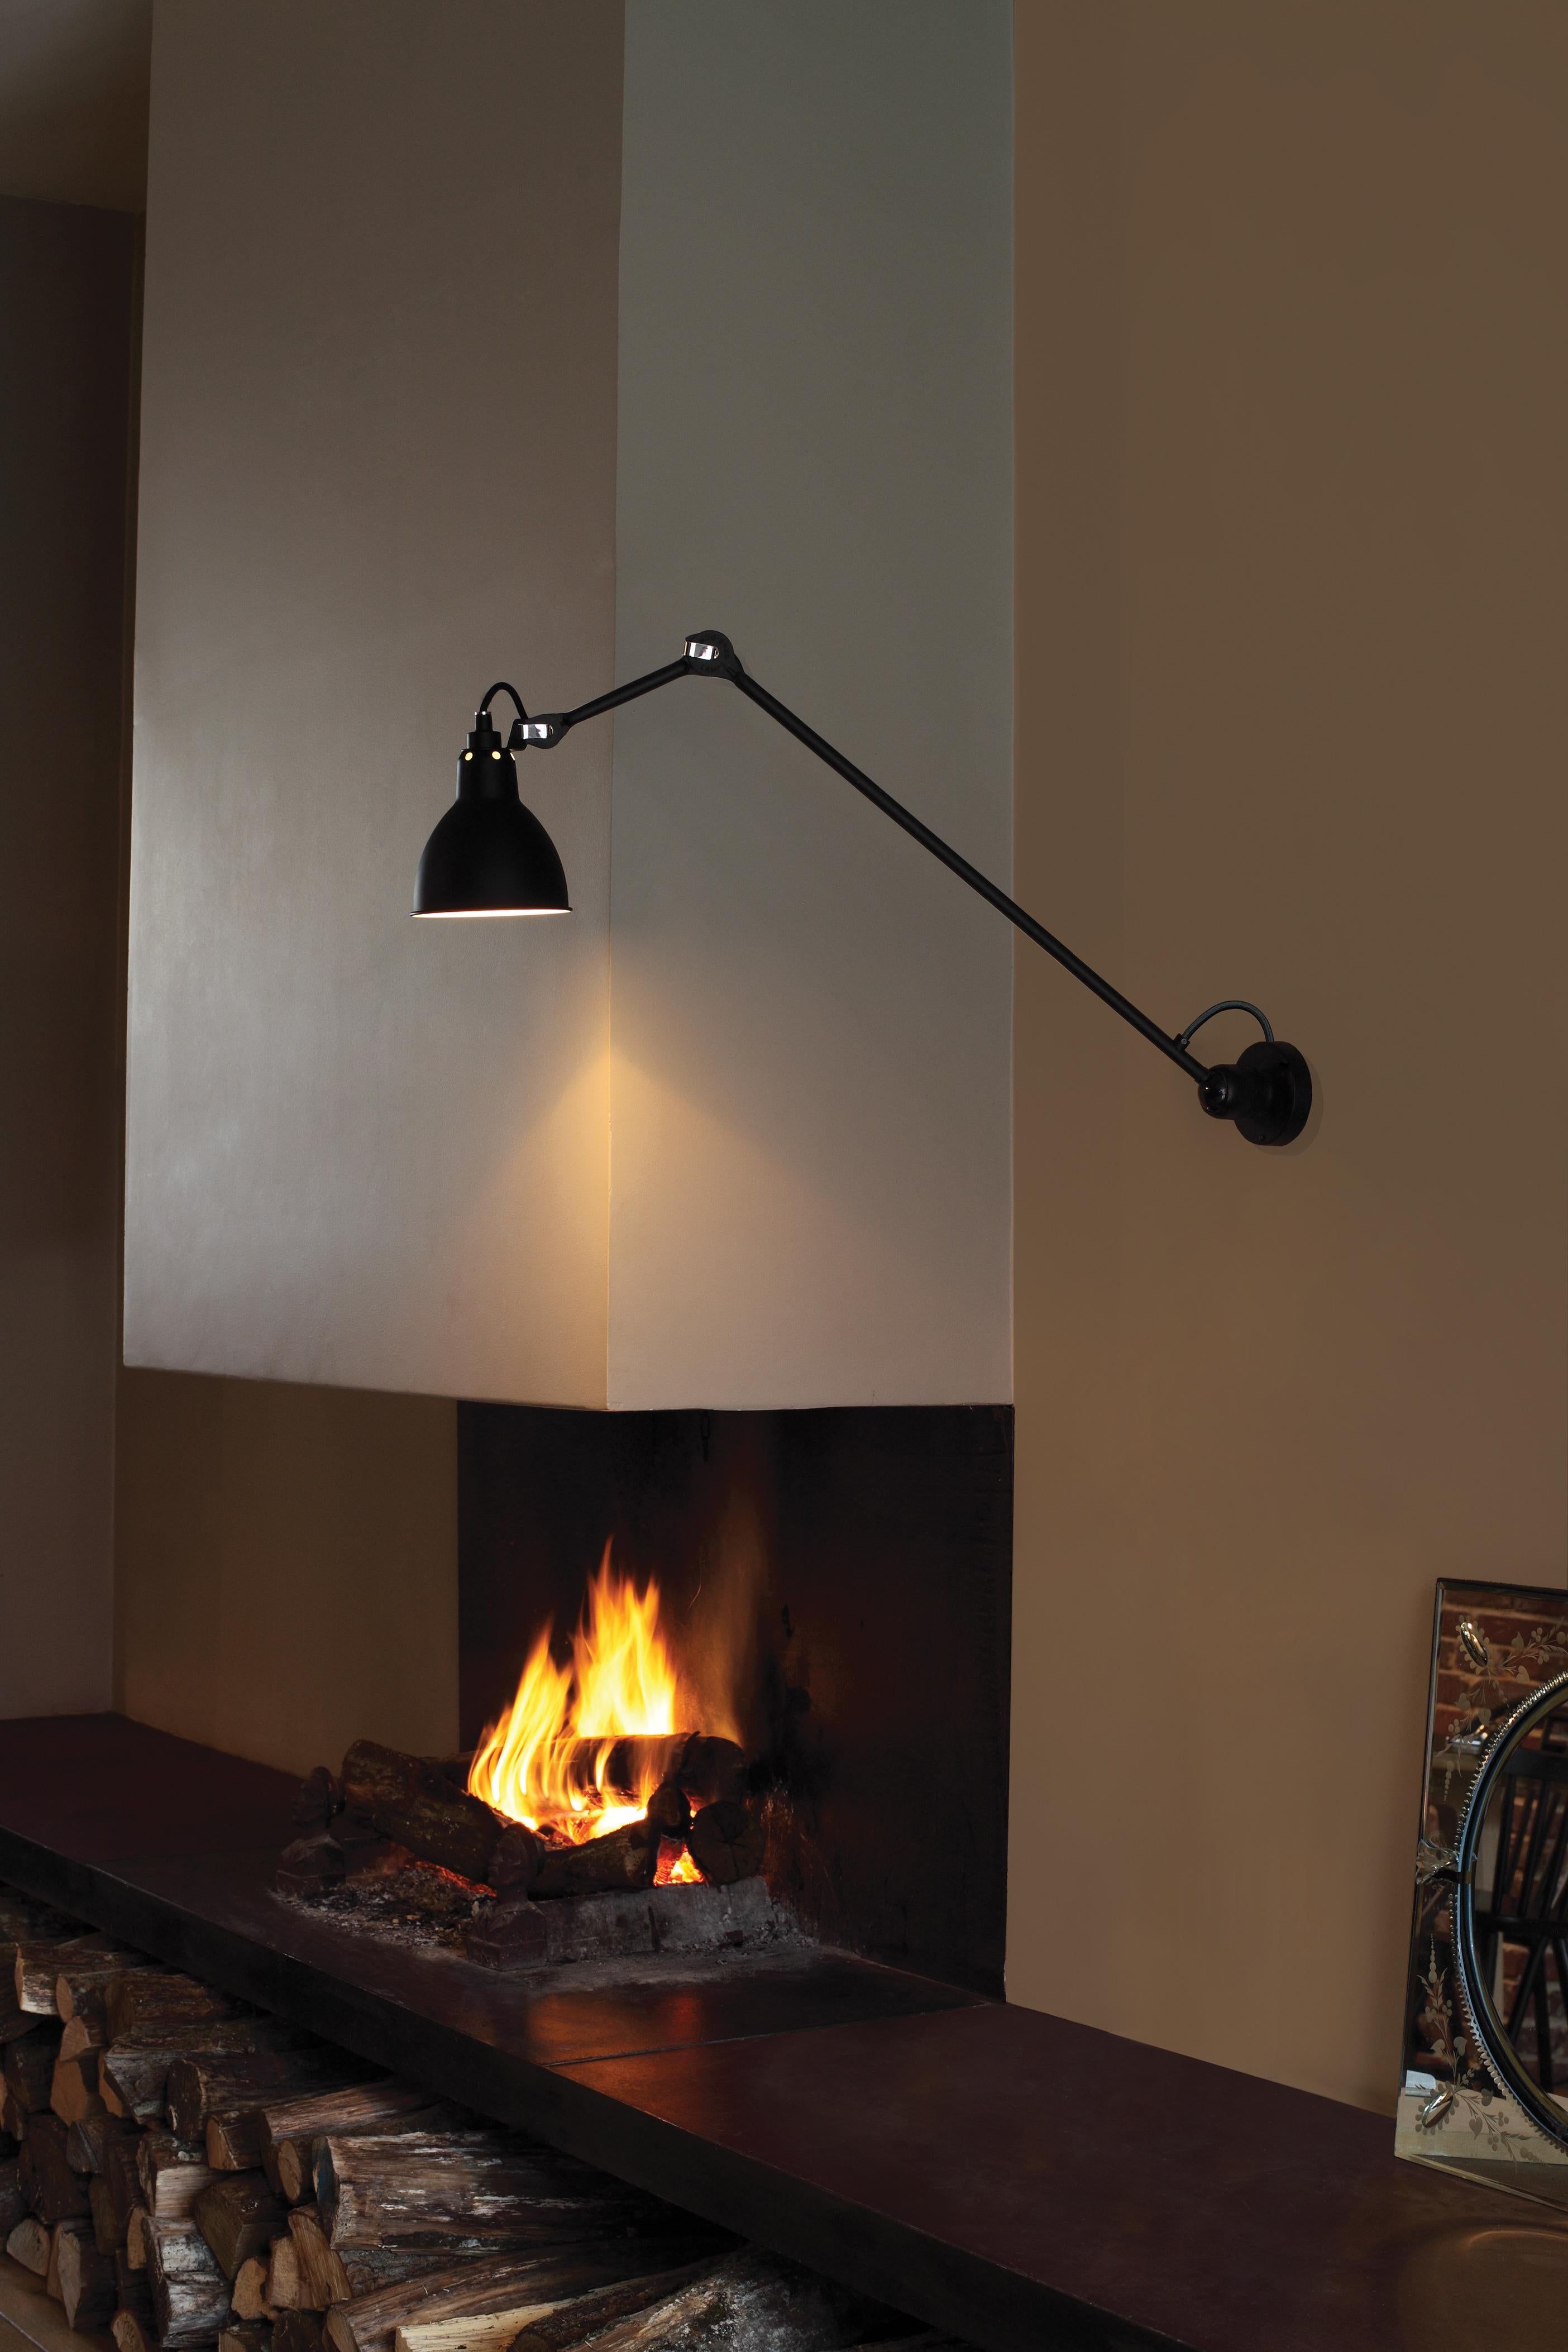 DCW Editions La Lampe Gras N°304 L60 Wall Lamp in Black Steel Arm and Raw Copper Shade by Bernard-Albin Gras
 
 In 1921 Bernard-Albin GRAS designed a series of lamps for use in offices and in industrial environments. The GRAS lamp, as it was